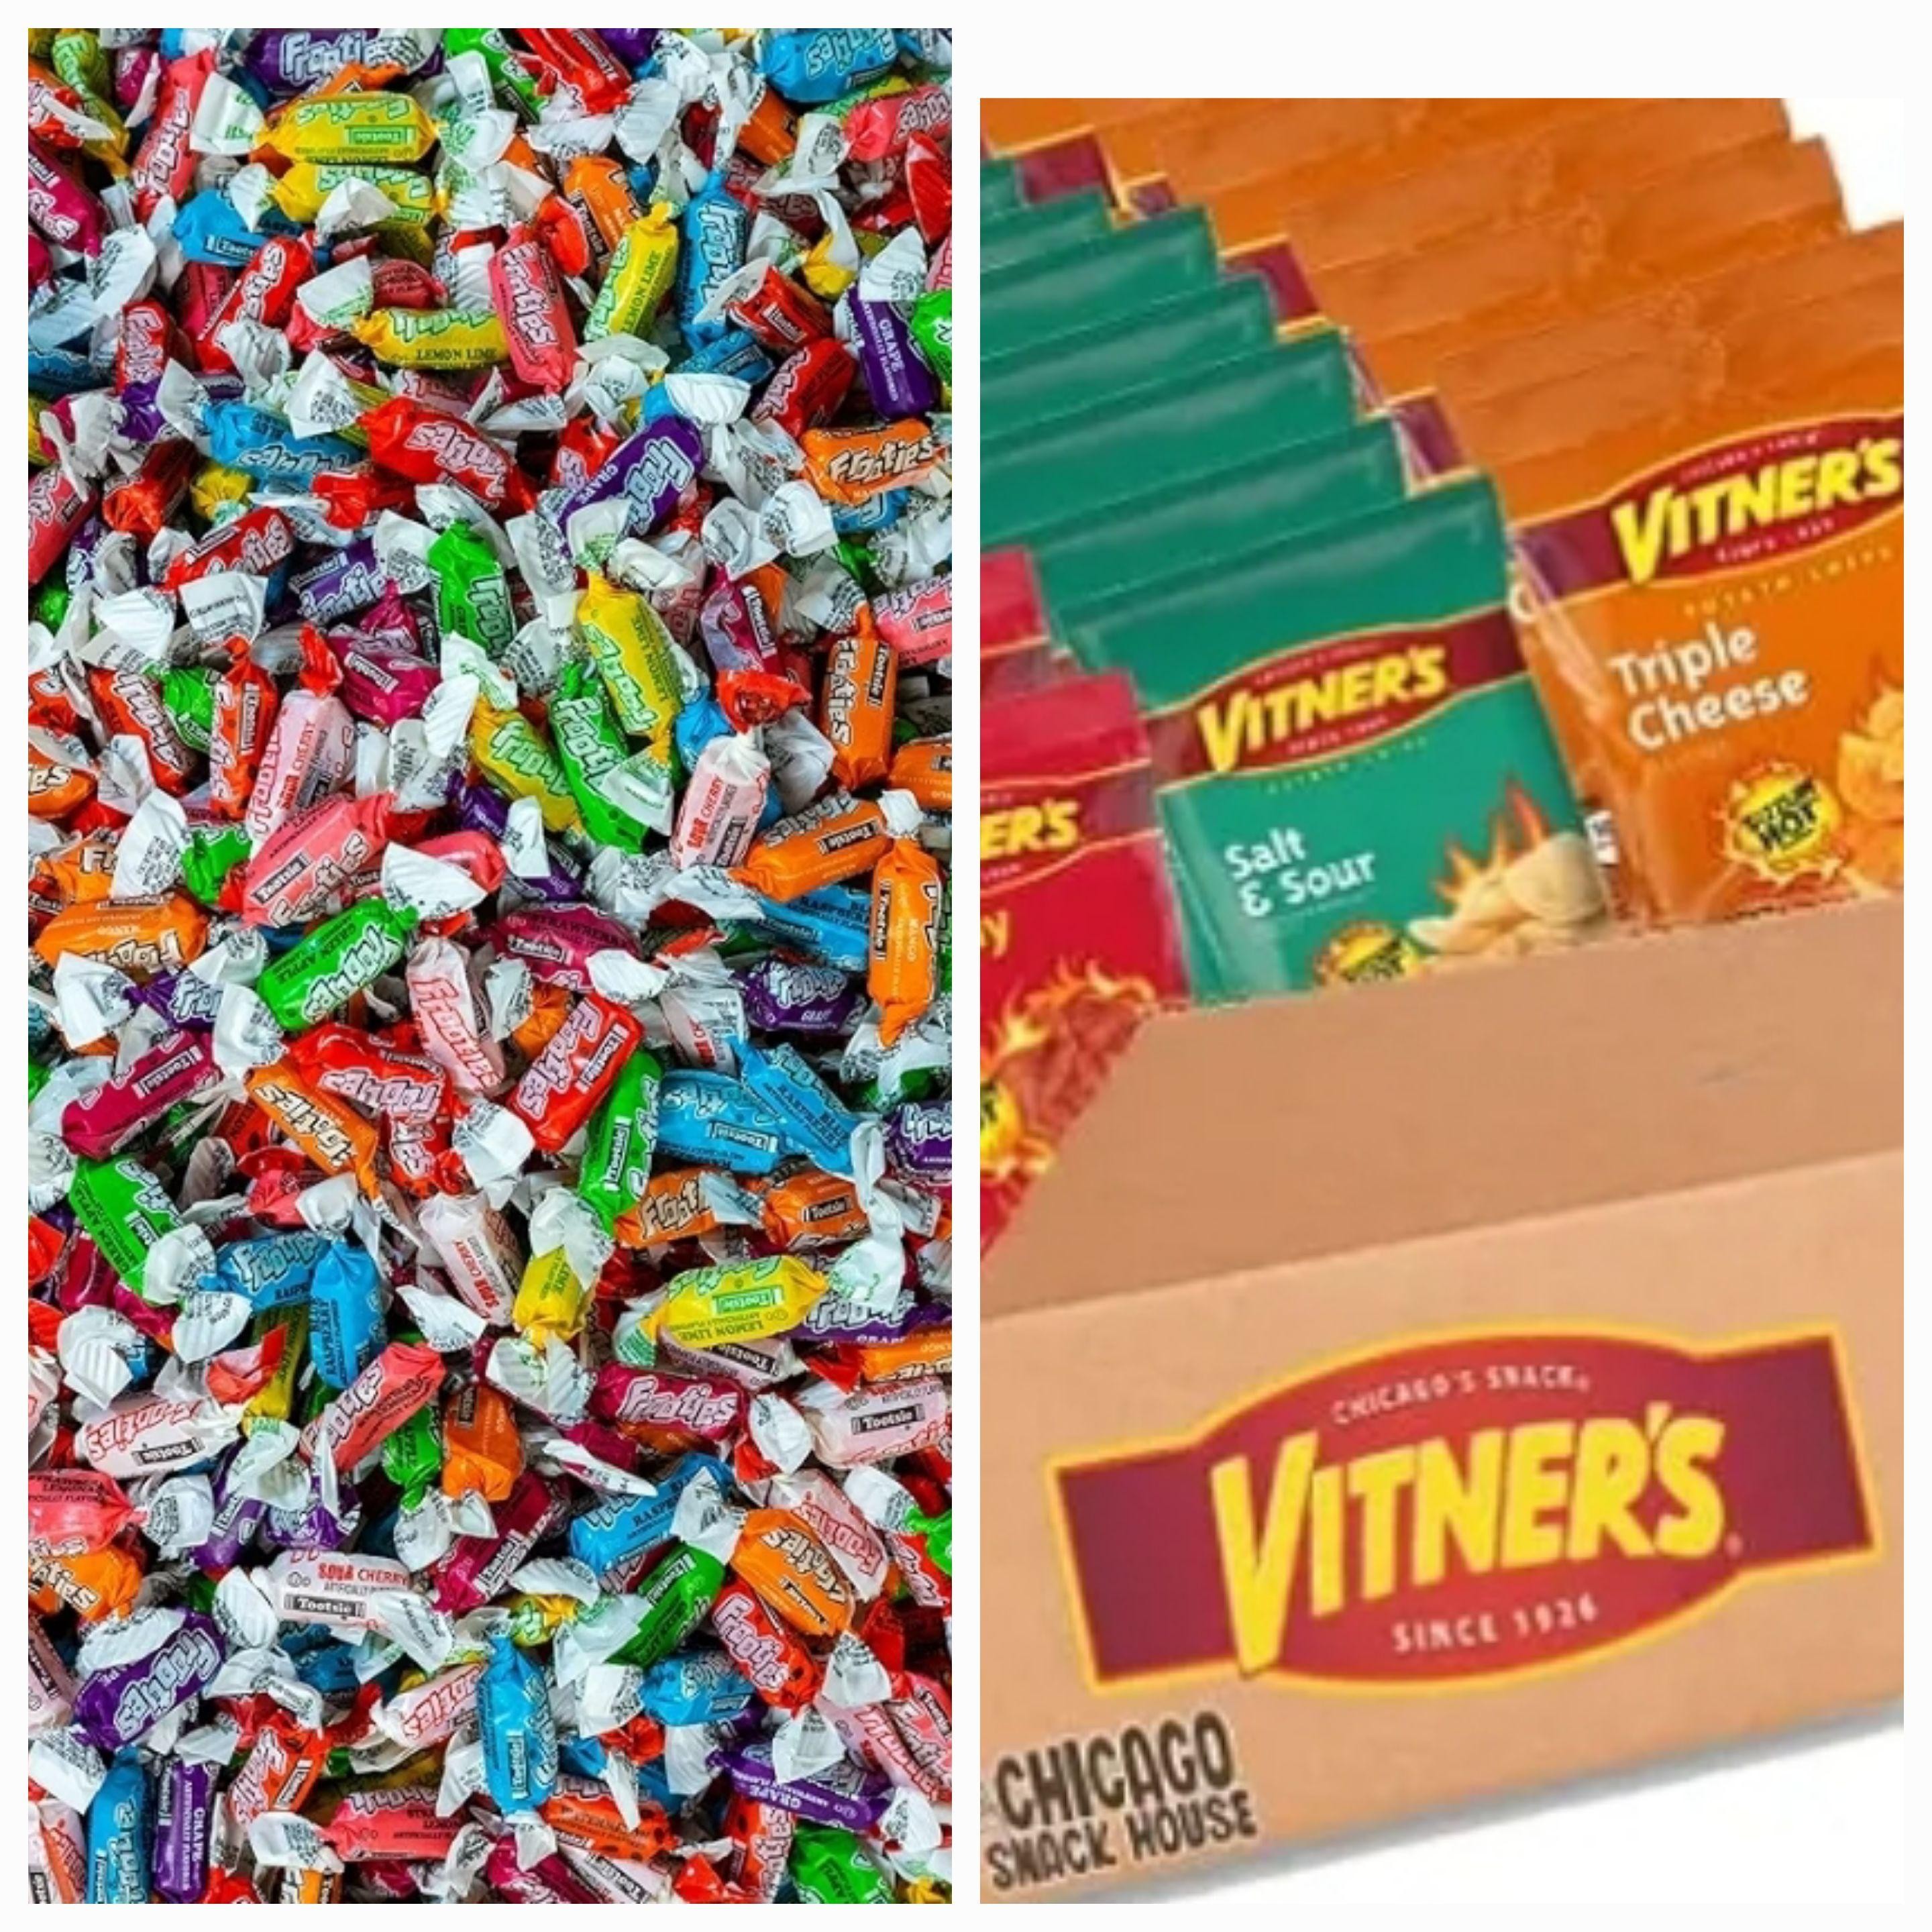 VITNERS CHIPS & FROOTIES CANDY